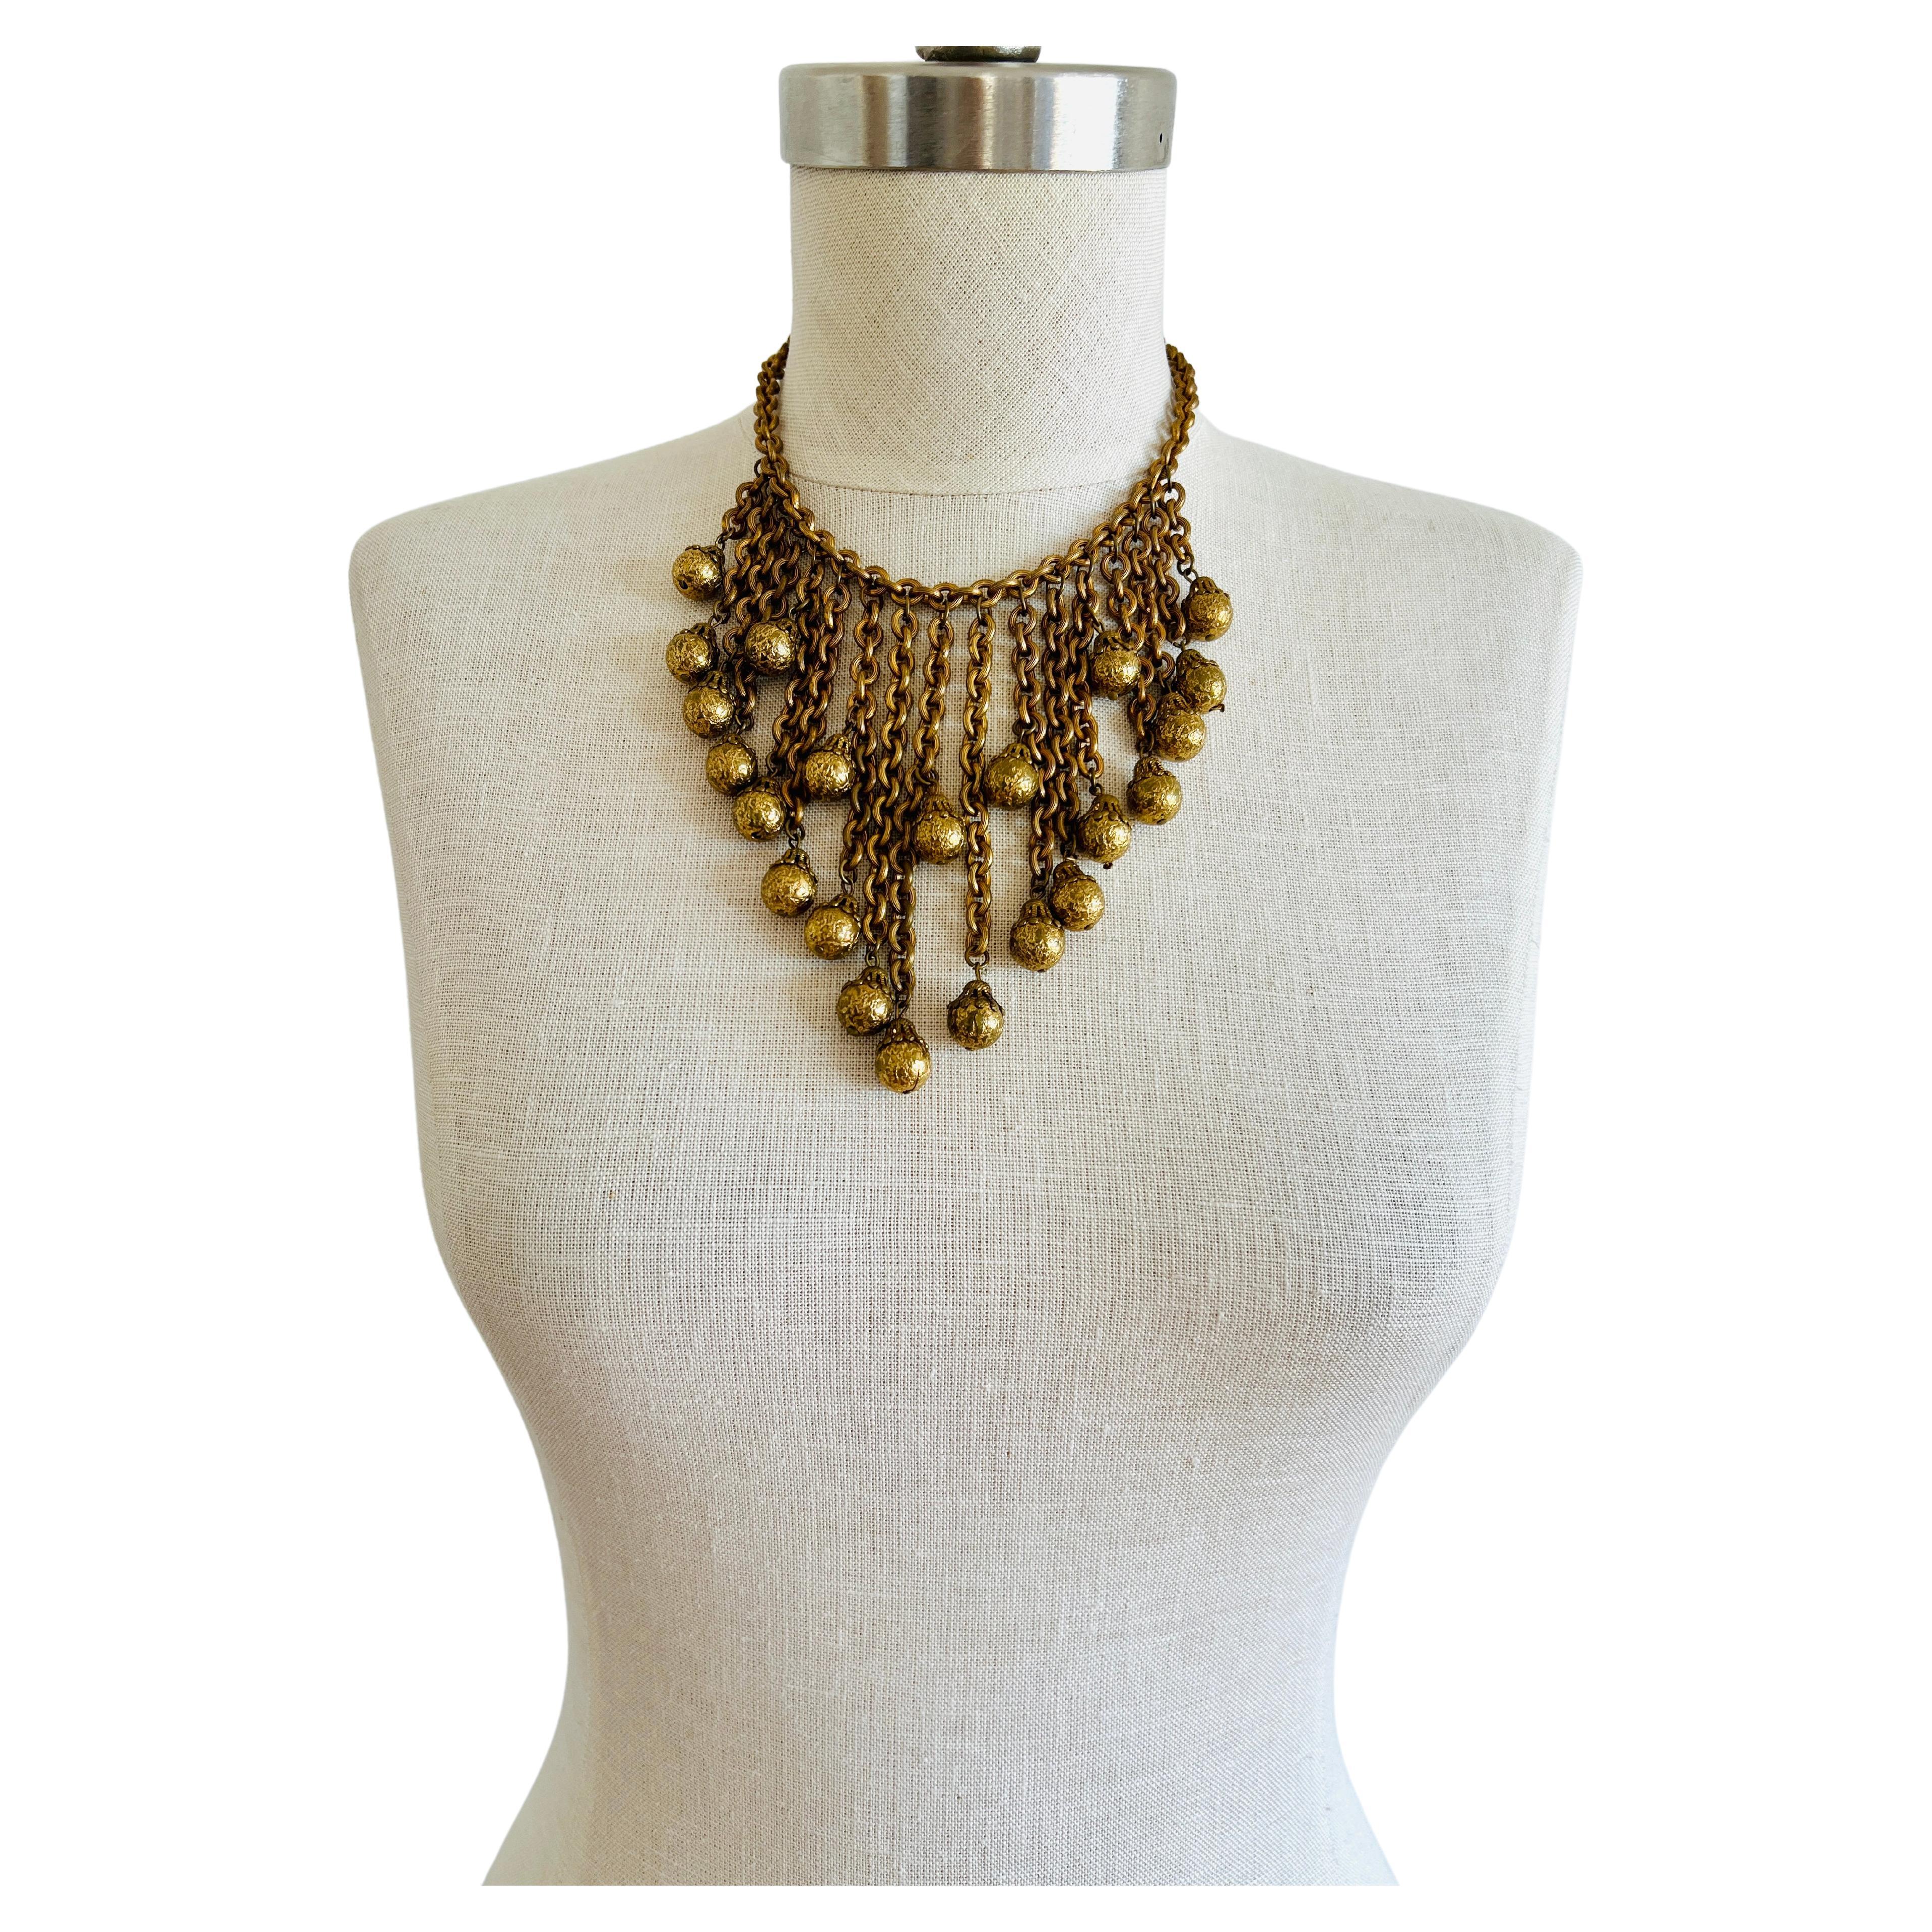 This statement choker necklace is well-constructed, weighing approximately 145 grams. It features 17 varying lengths of RGP chain link tassels with dangling balls. The longest tassel drops over 4